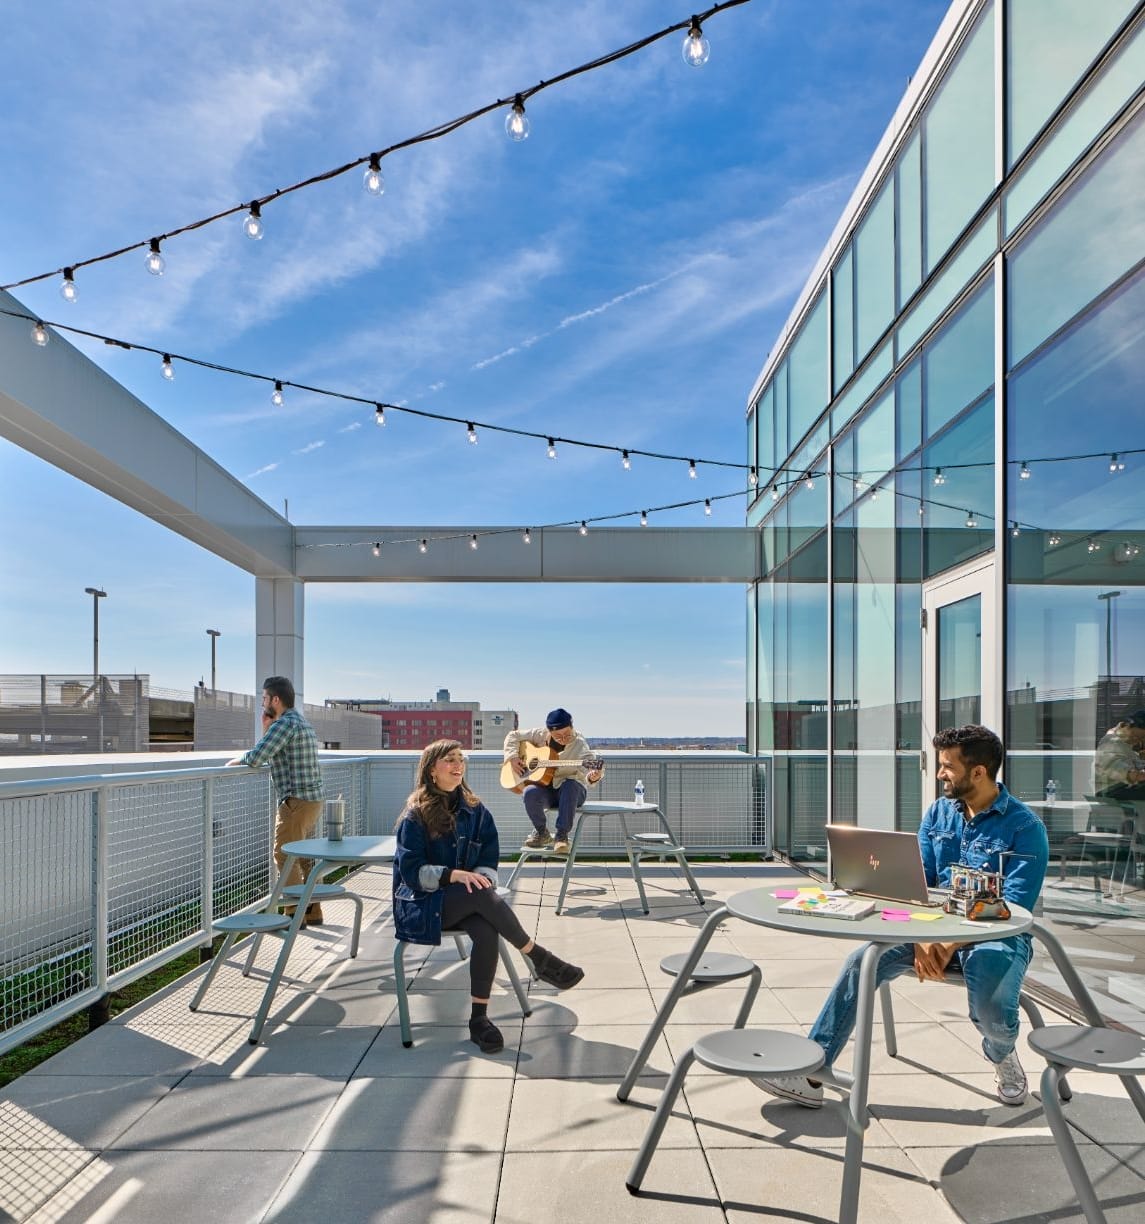 Students taking in outside views, playing a guitar, working on a laptop, and more on Tangen Hall's rooftop terrace.